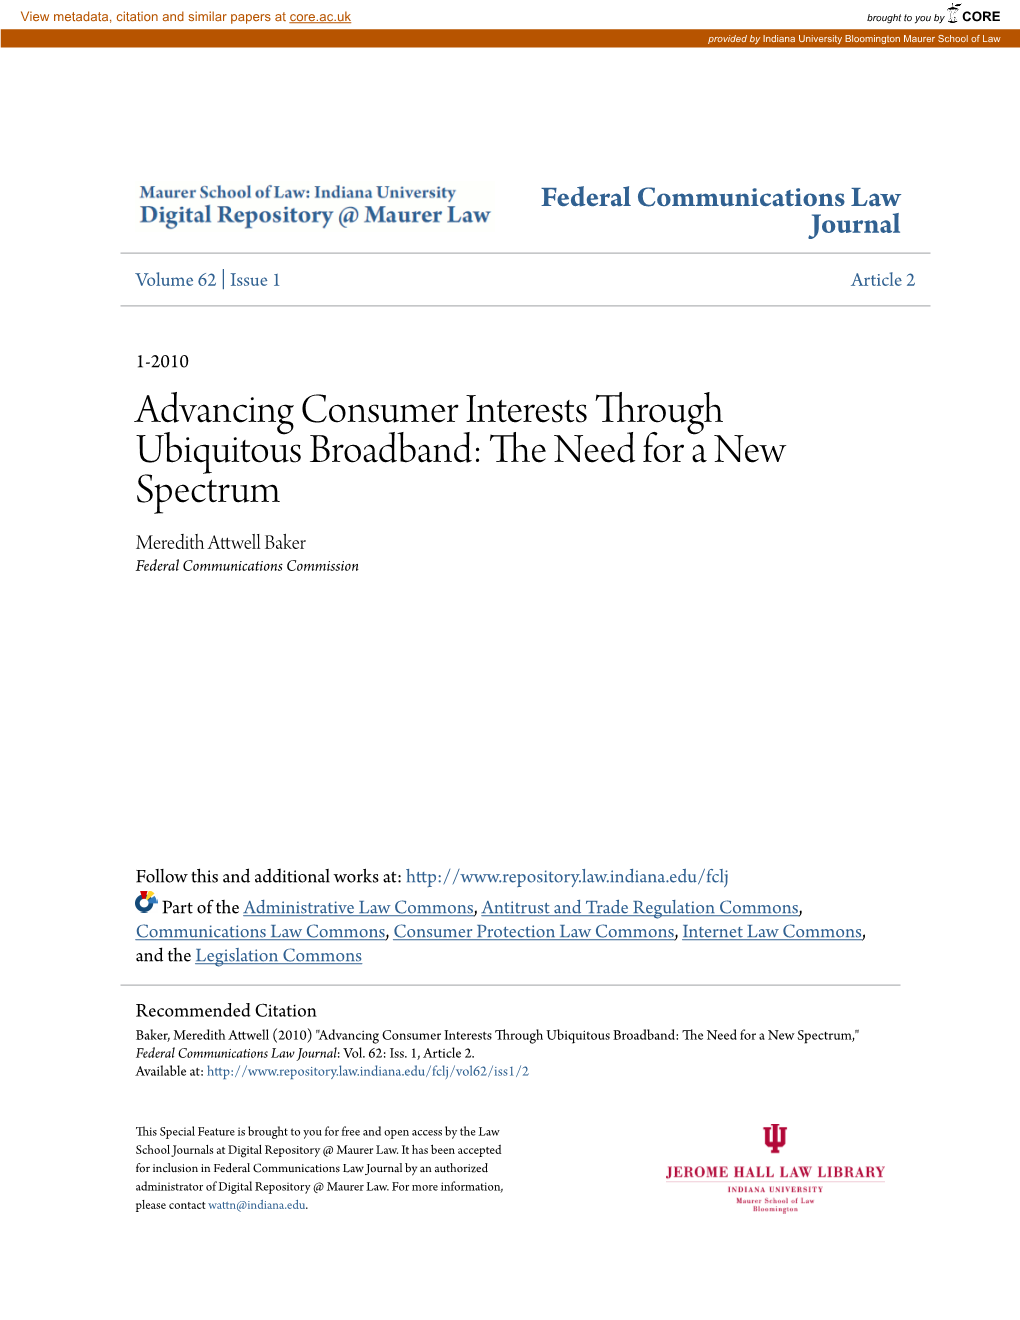 Advancing Consumer Interests Through Ubiquitous Broadband: the Eedn for a New Spectrum Meredith Attwell Baker Federal Communications Commission